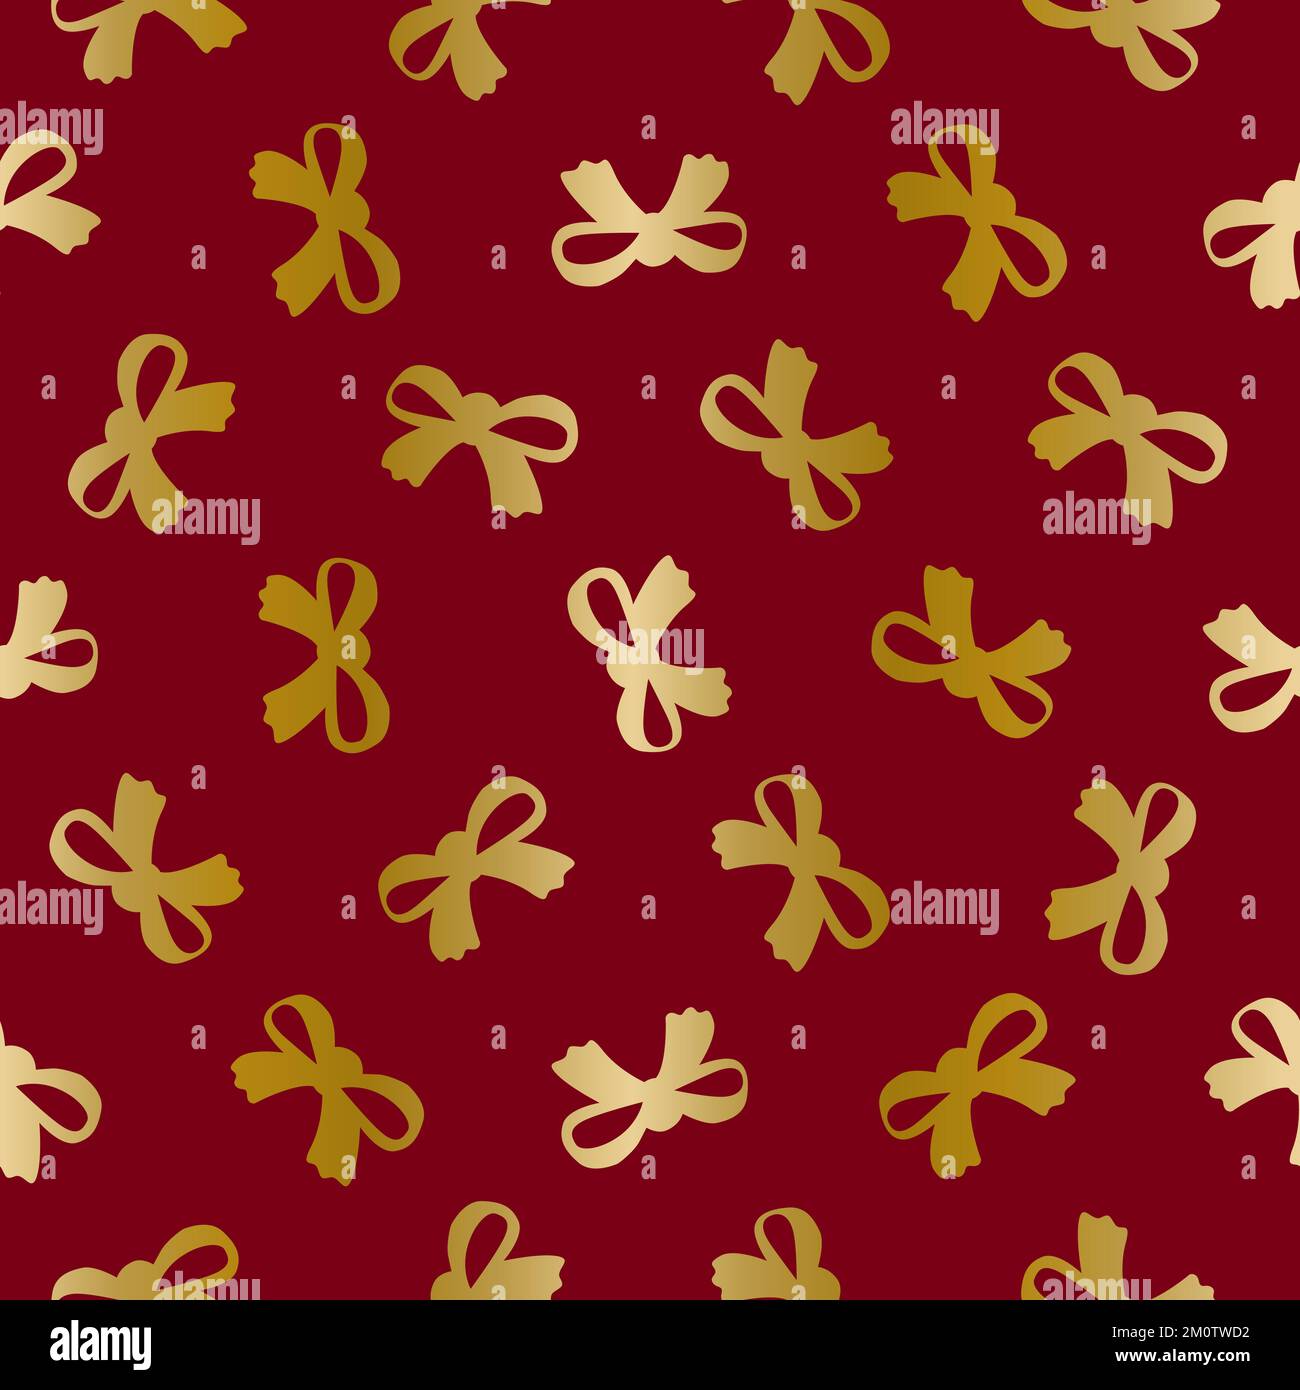 Gold bows on dark red vector seamless pattern Stock Vector